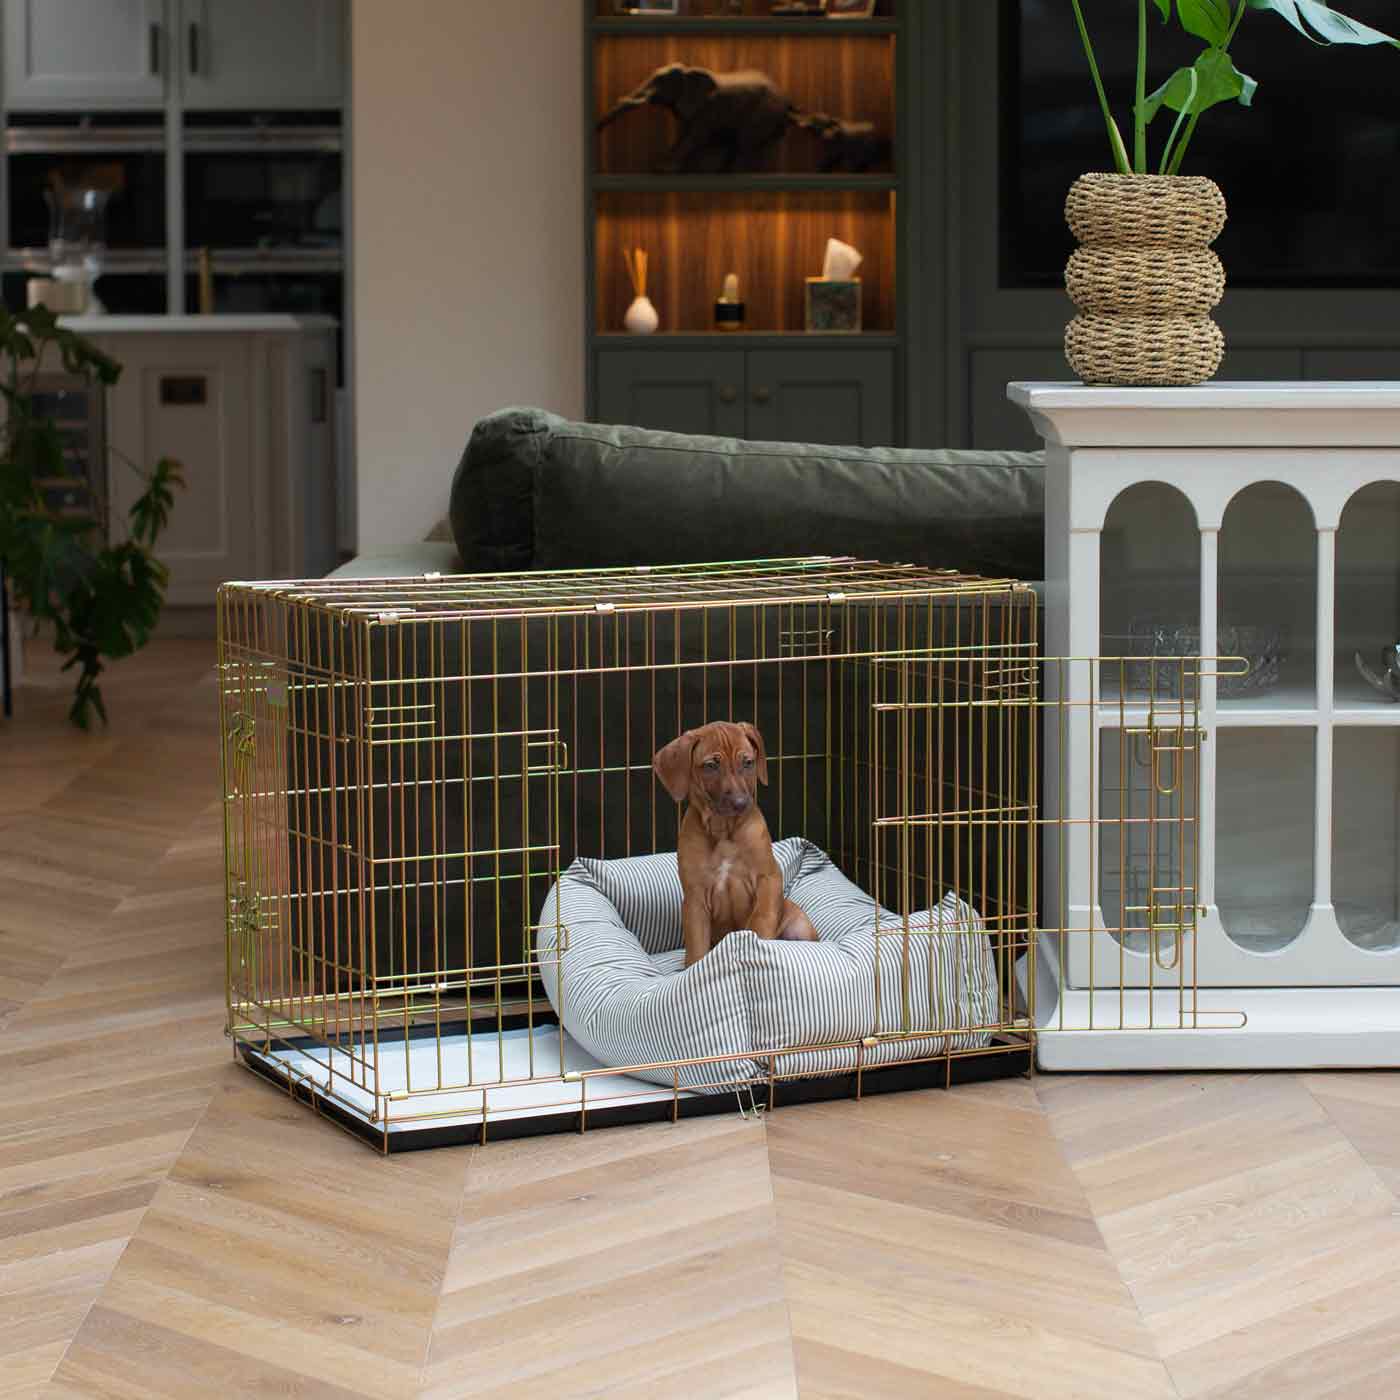 Cozy & Calming Puppy Cage Bed in Spots and Stripes, The Perfect Dog Cage Accessory For The Ultimate Dog Den! In Stunning Regency Stripe! Available To Personalize at Lords & Labradors US